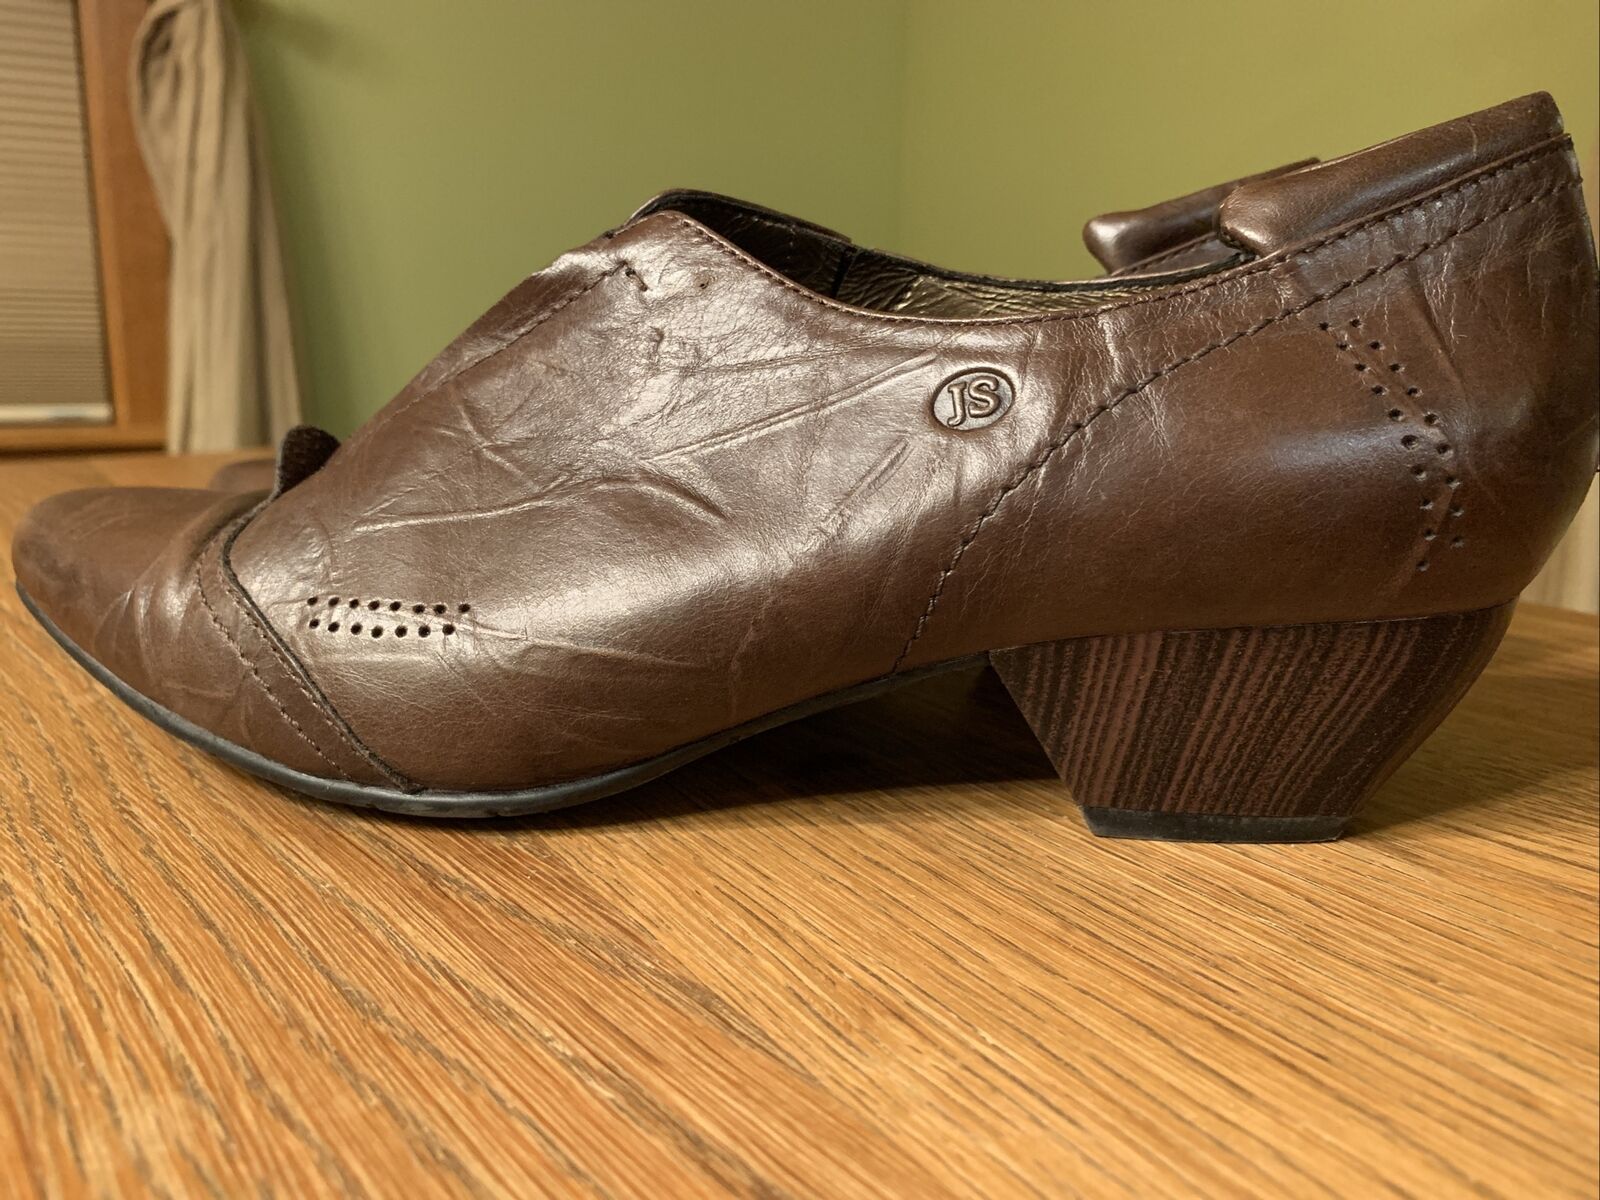 Women’s Quality josef seibel size 40(9) Brown leather Dress Shoes VGC!!